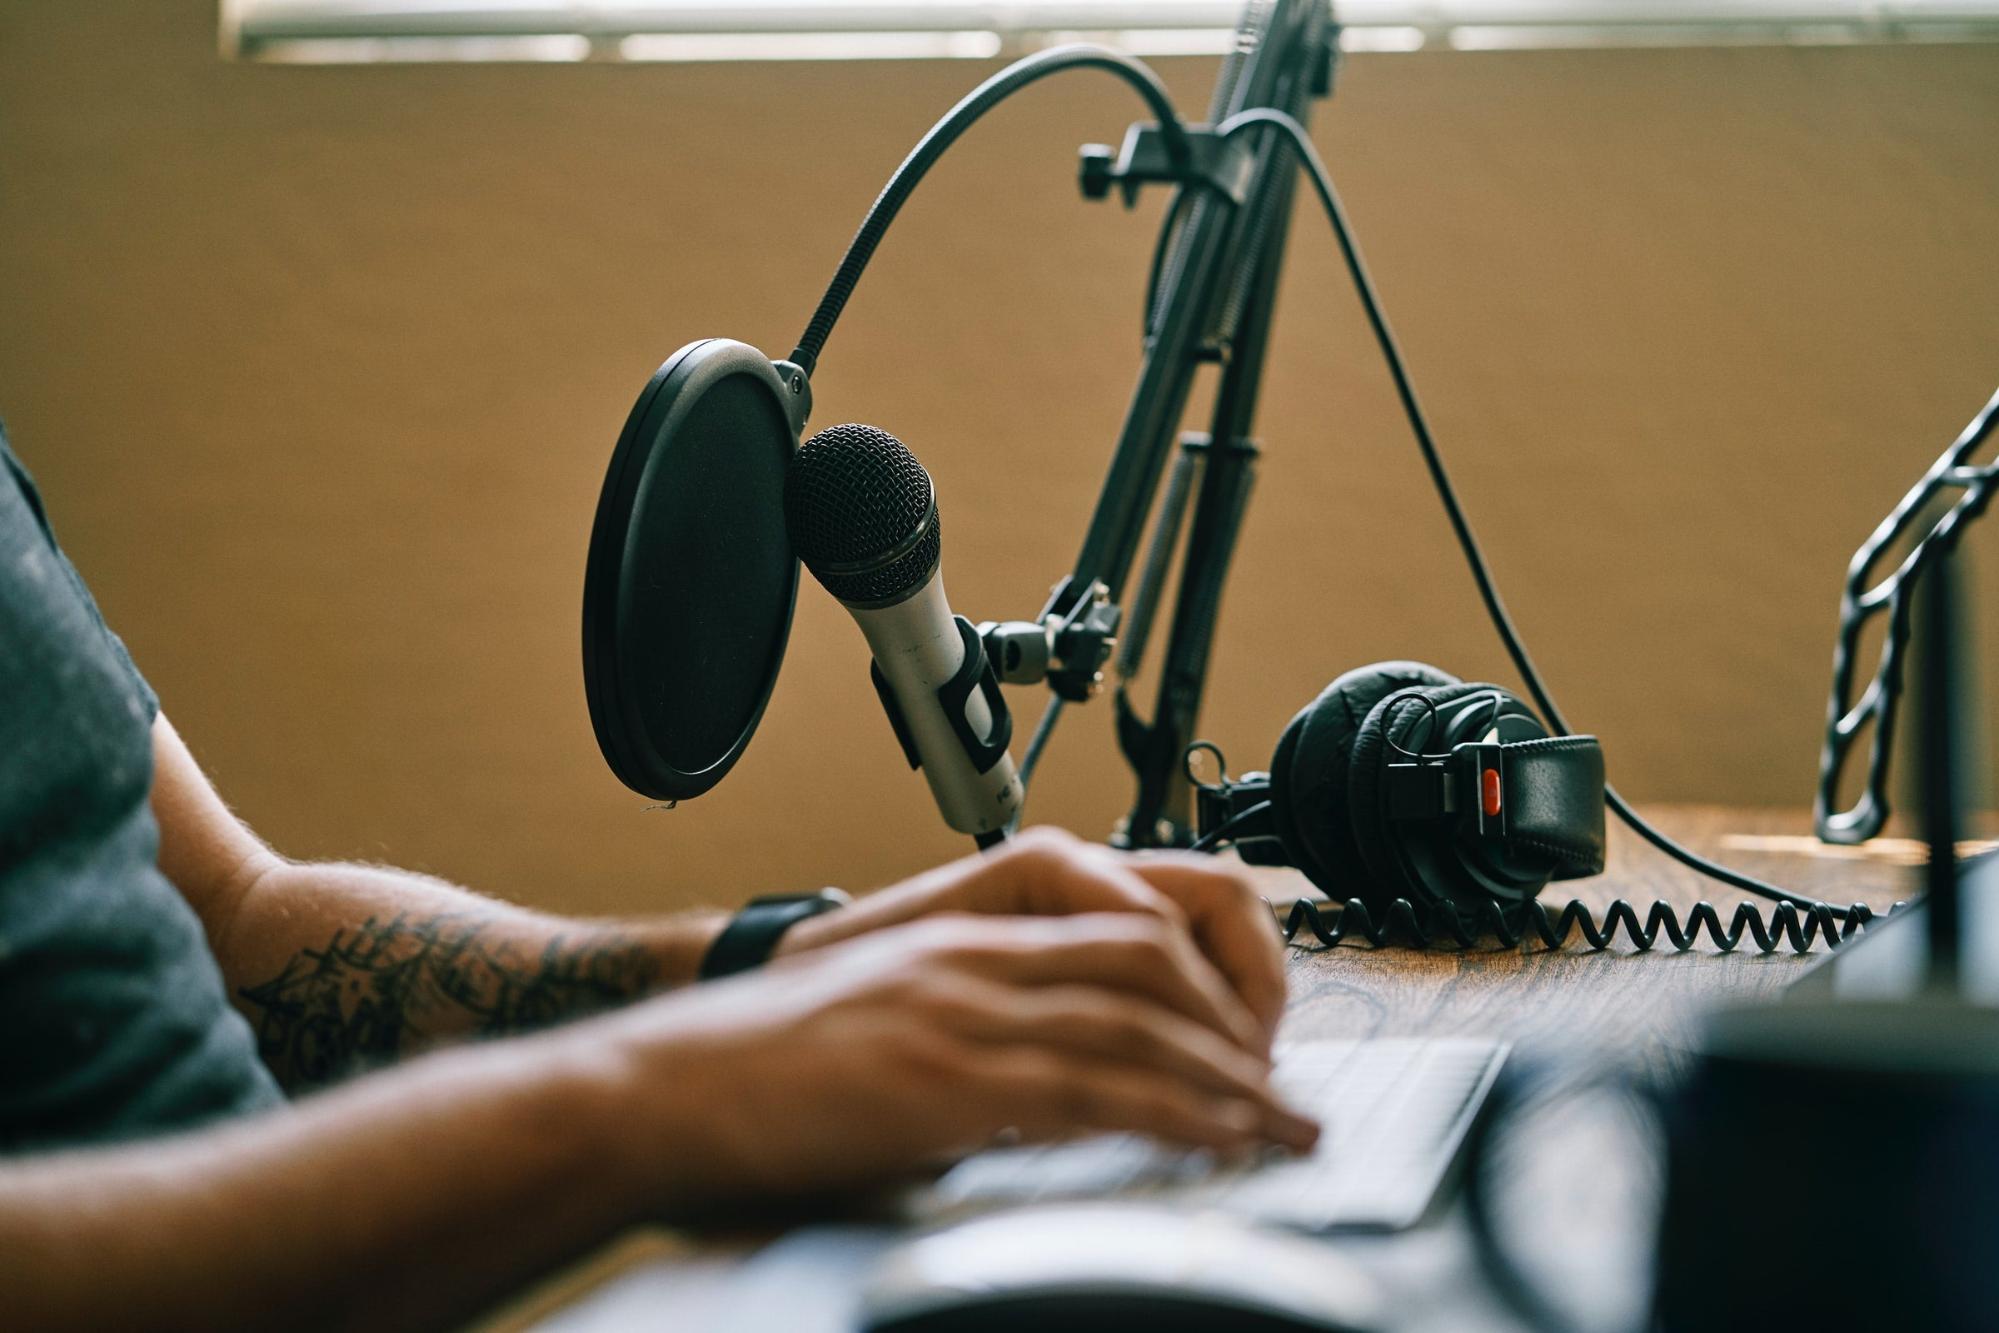 A person sits in front of a microphone and keyboard, editing a podcast